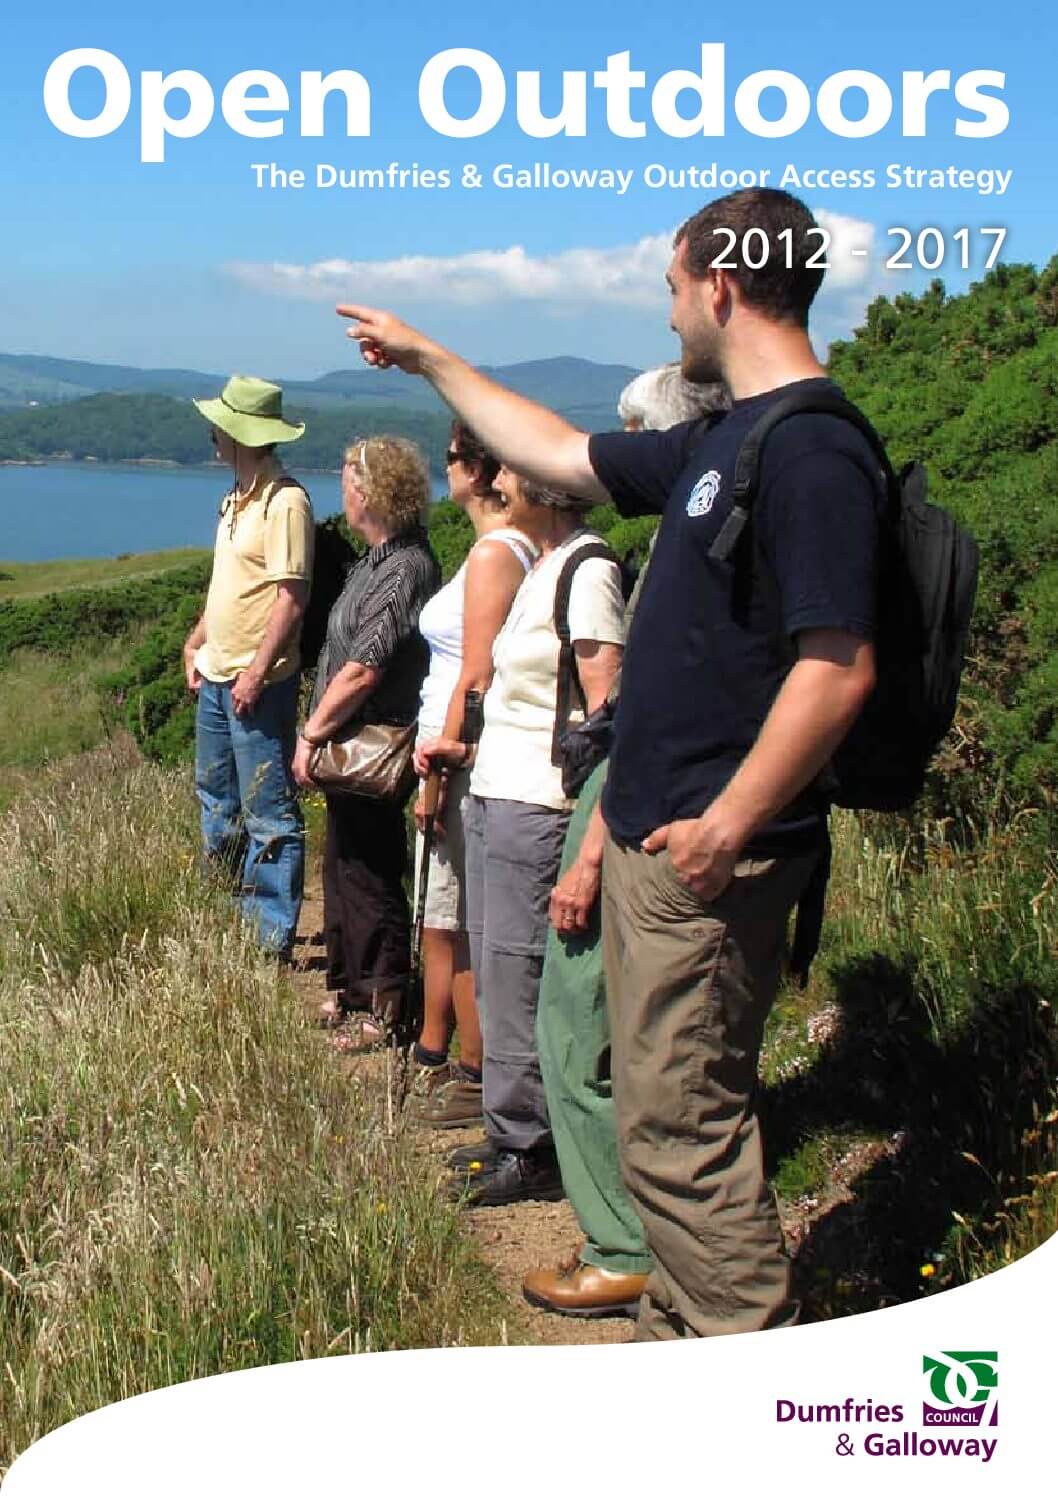 Open Outdoors – Dumfries & Galloway Outdoor Access Strategy – 2012-2017